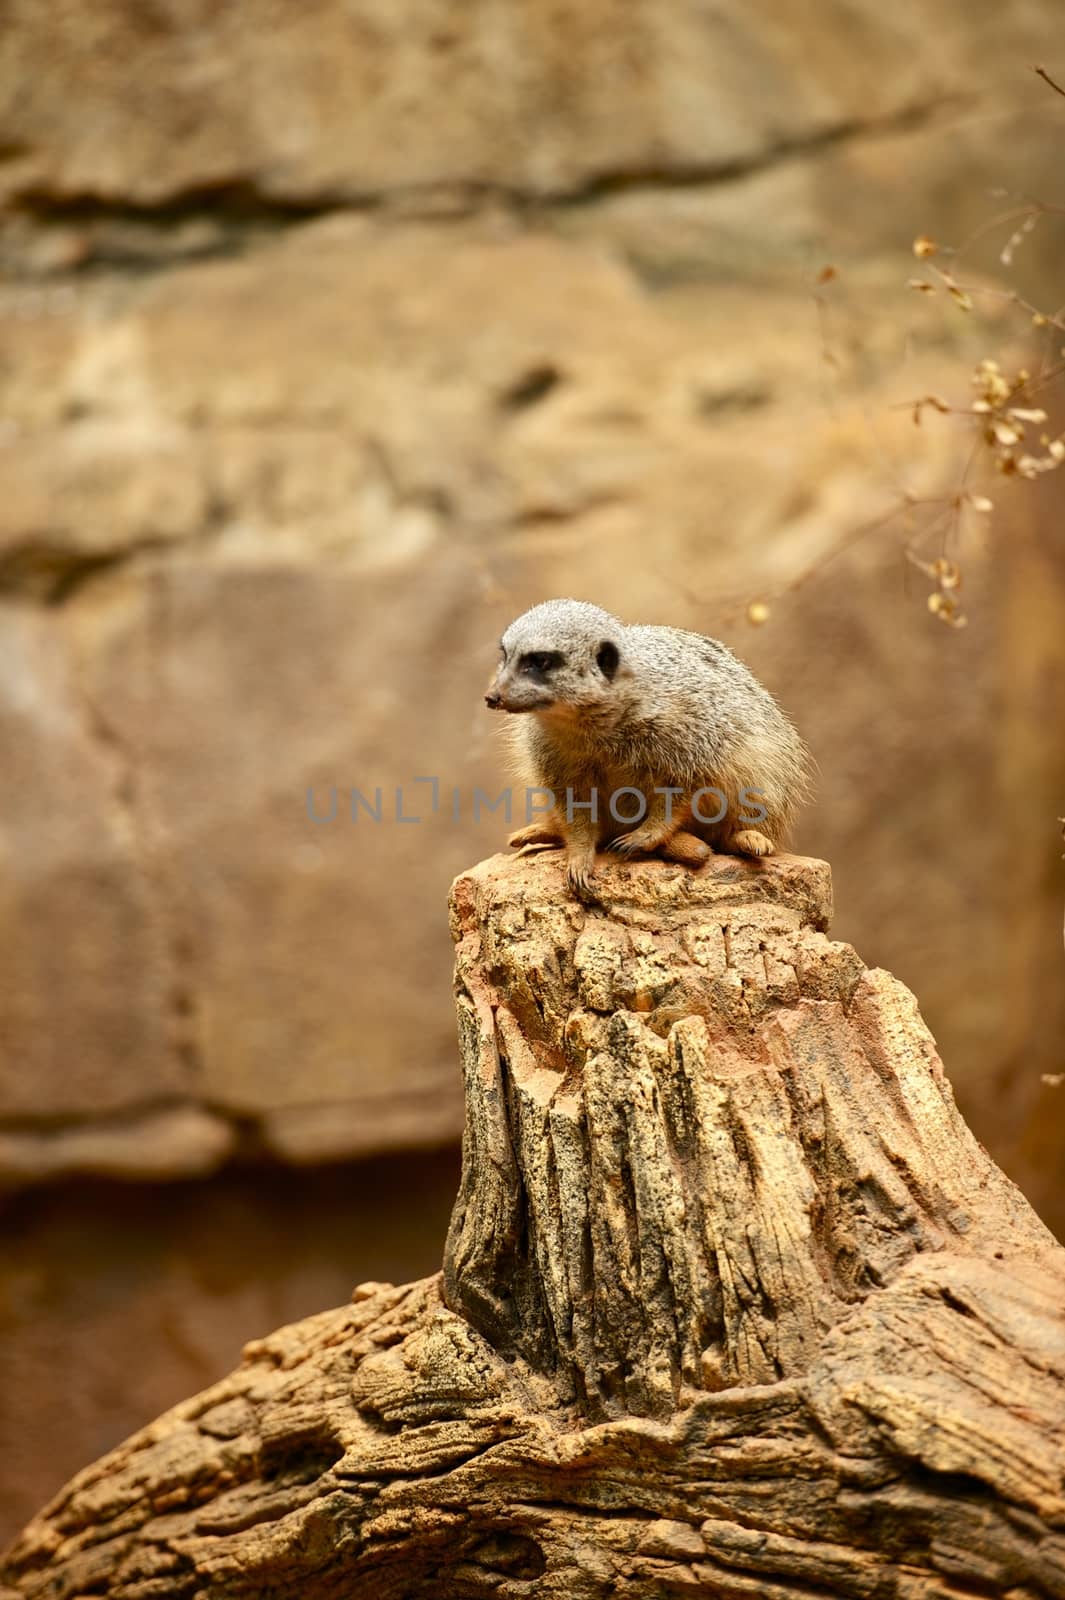 Suricate by welcomia